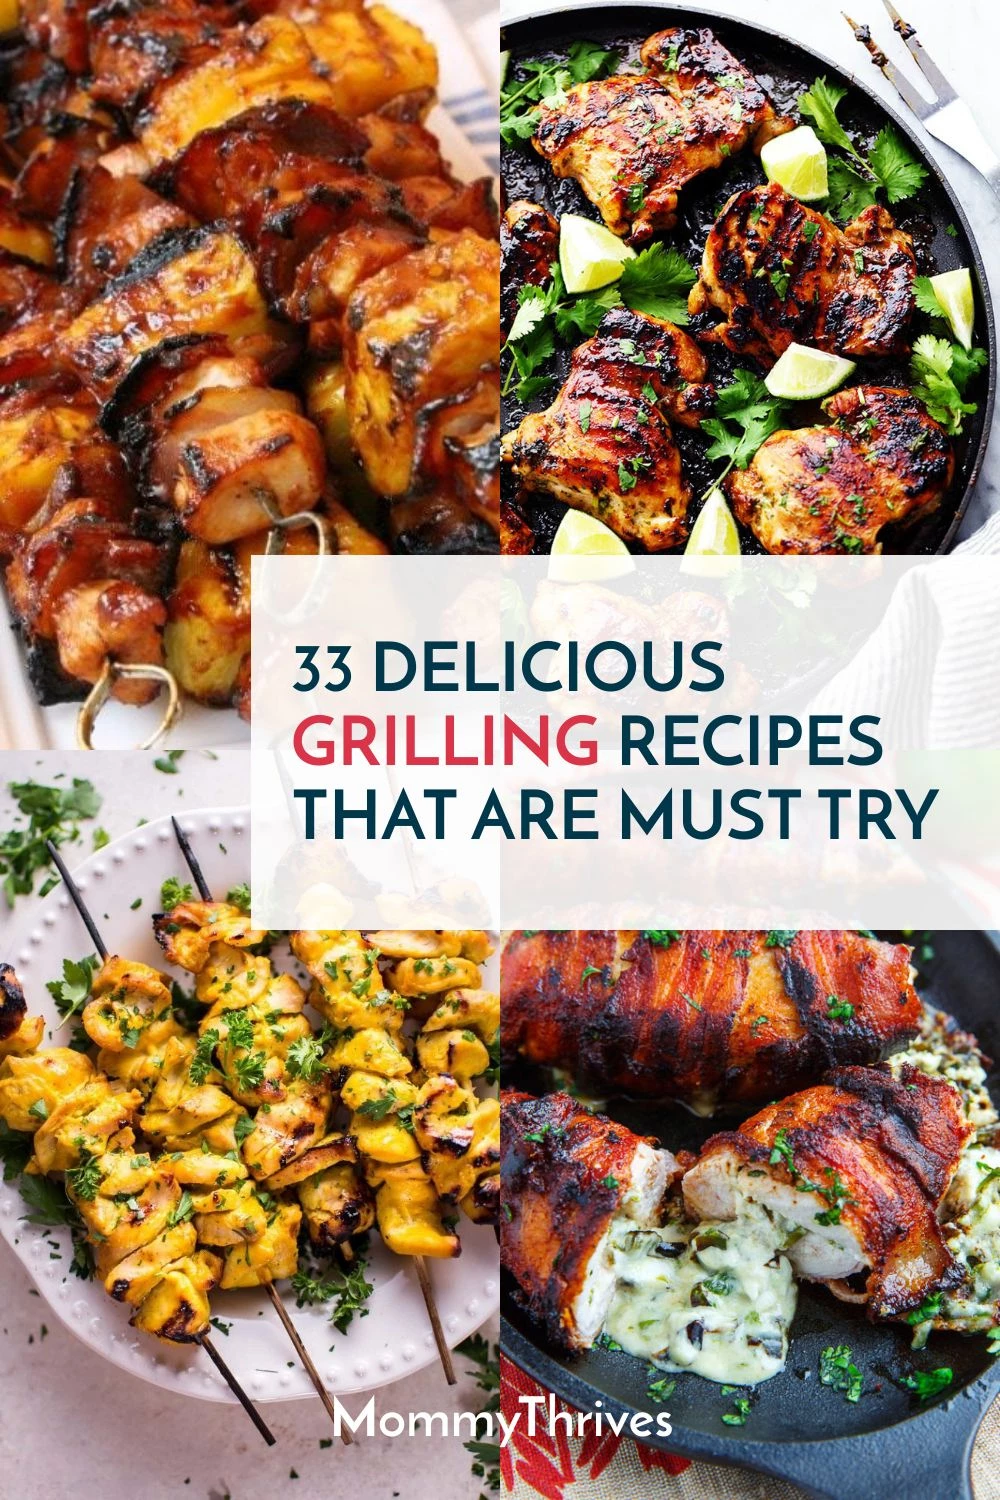 33 Of The Best Grill Recipes To Rock Your Tastebuds - MommyThrives